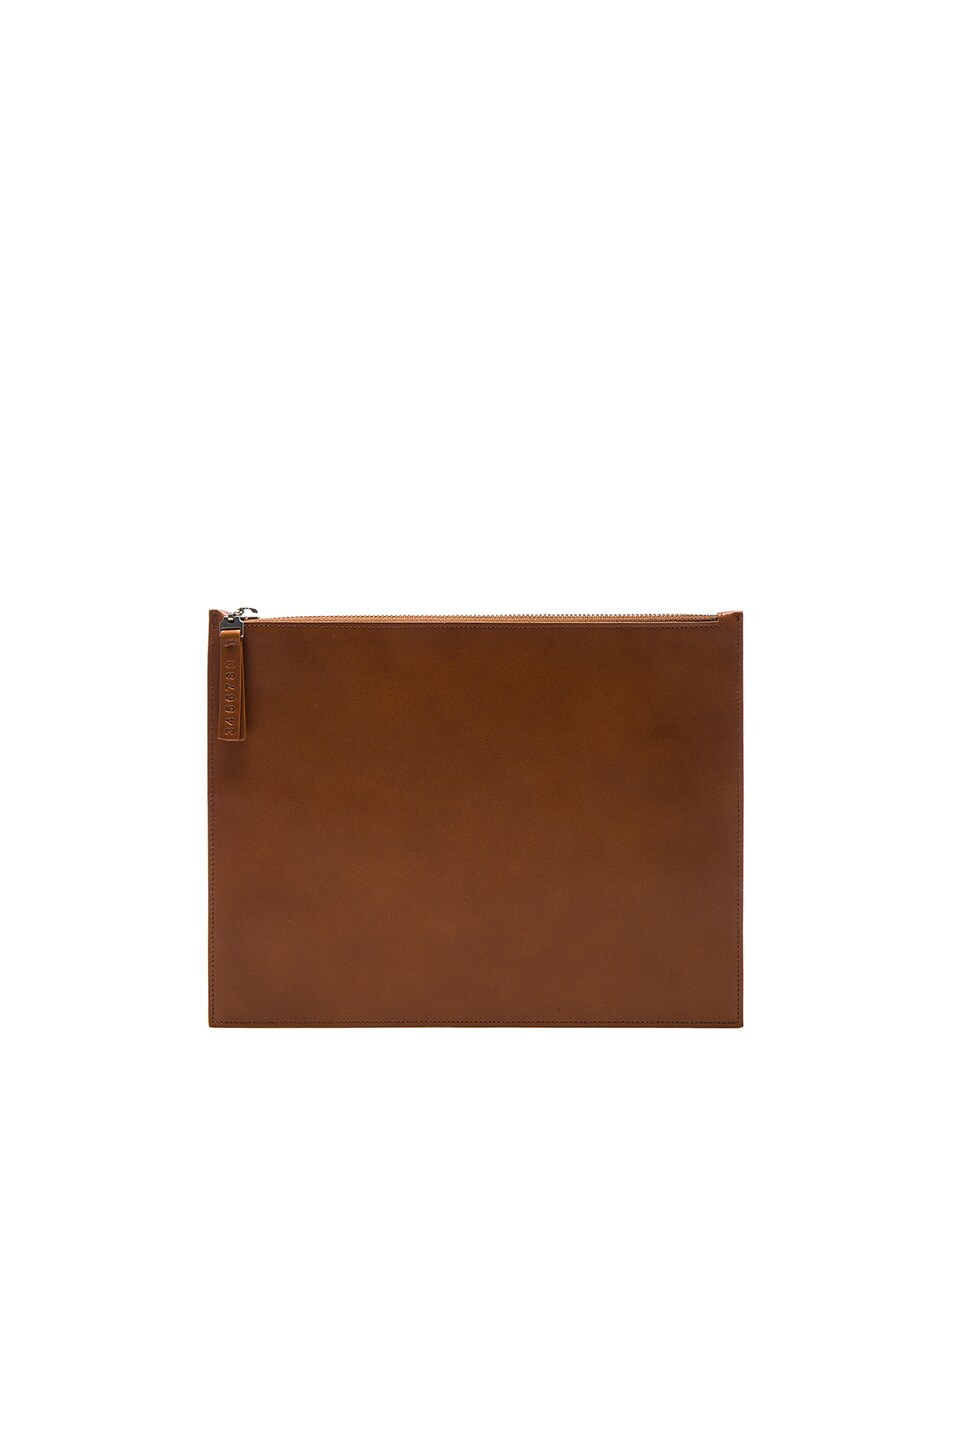 Image 1 of Maison Margiela Calf Leather Pouch in Papaya Tan